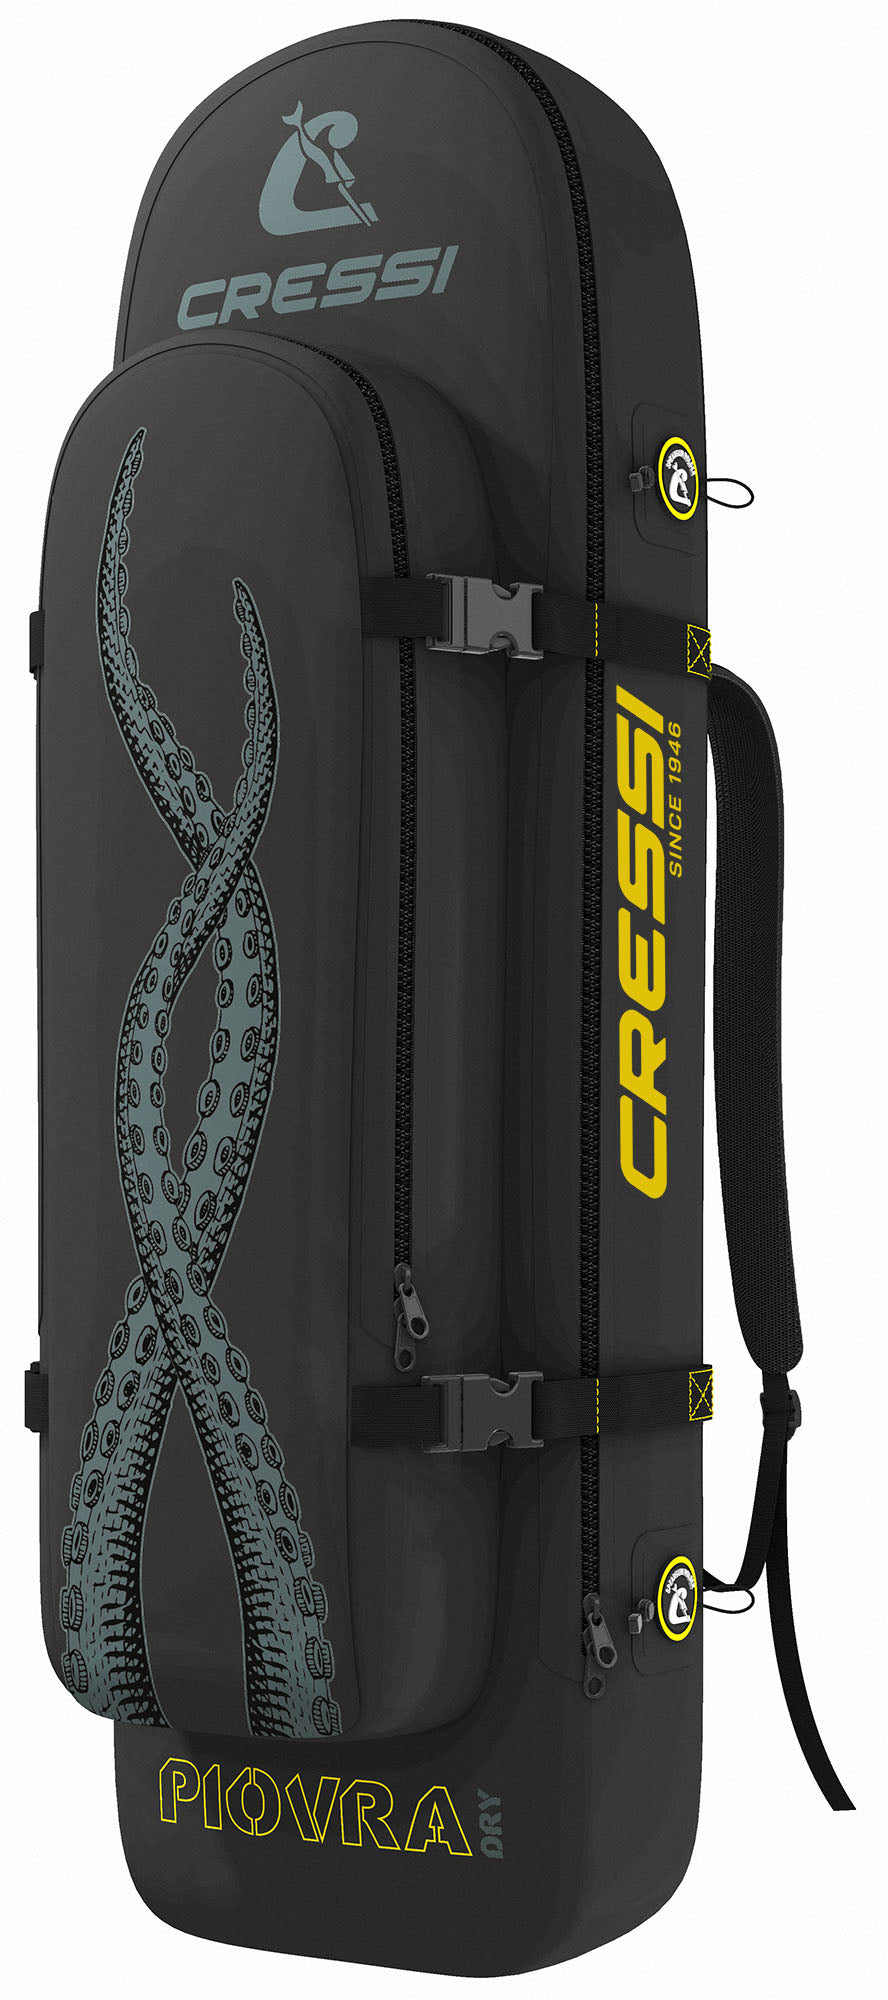 Piovra Fin Backpack XL - Dive & Fish